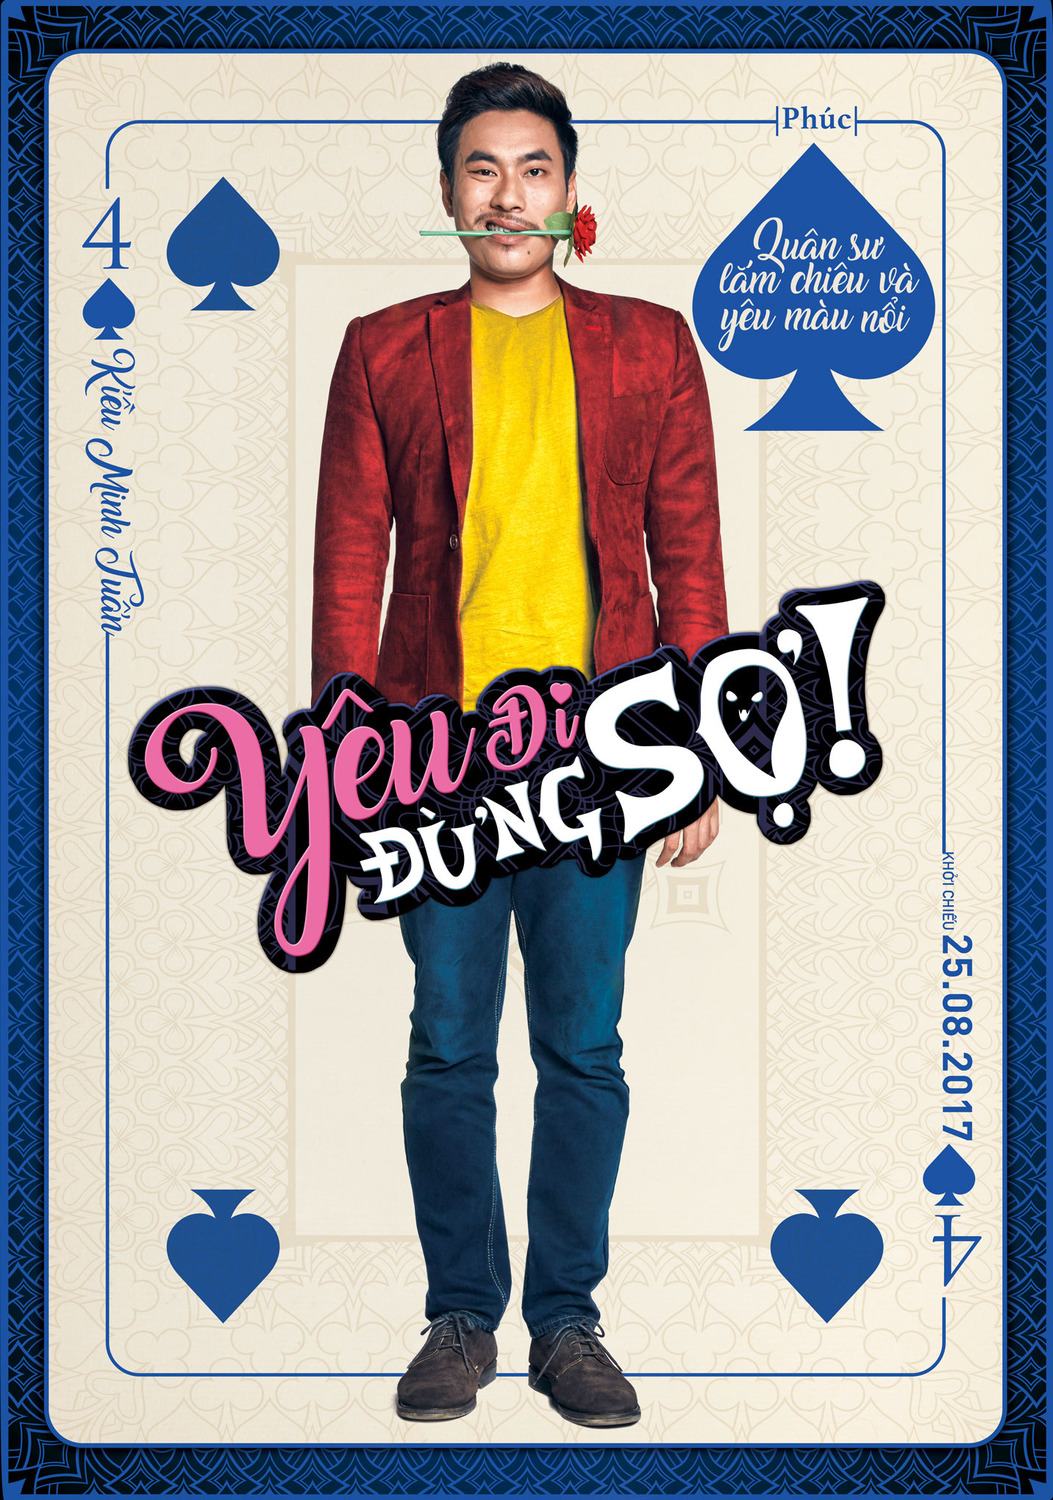 Extra Large Movie Poster Image for Yeu Di, Dung So! (#4 of 7)